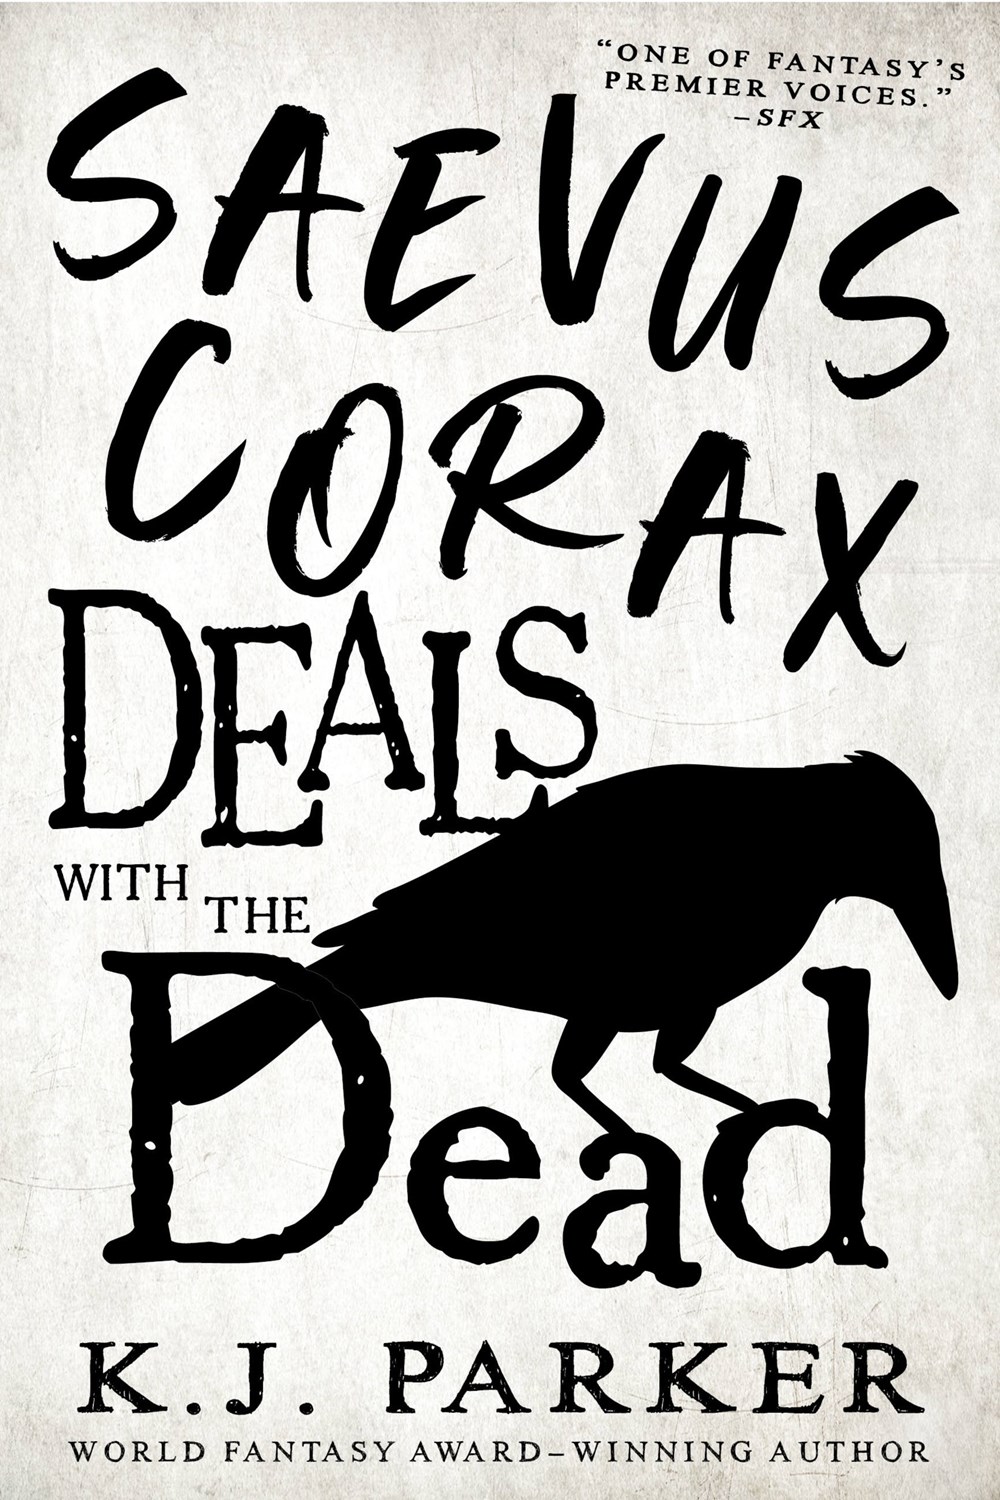 Saevus Corax Deals with the Dead